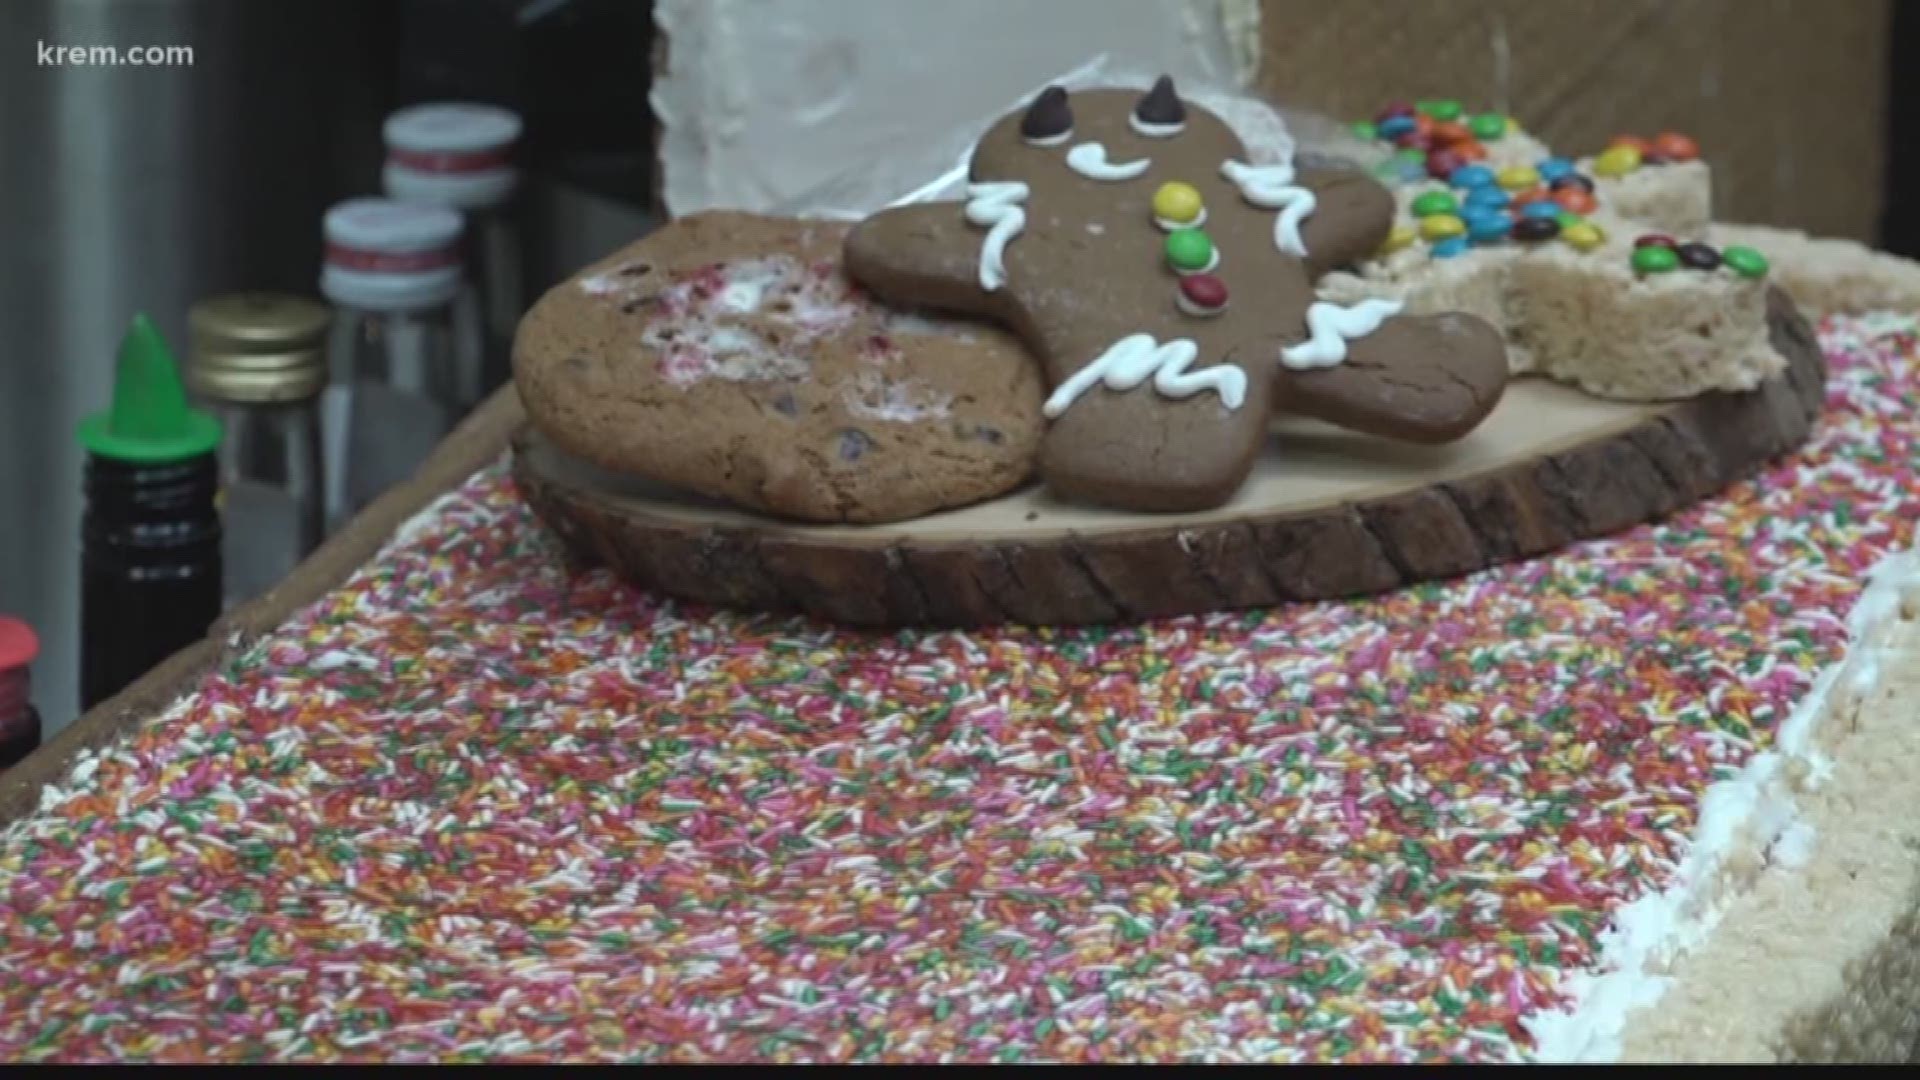 Chef builds life-size gingerbread house